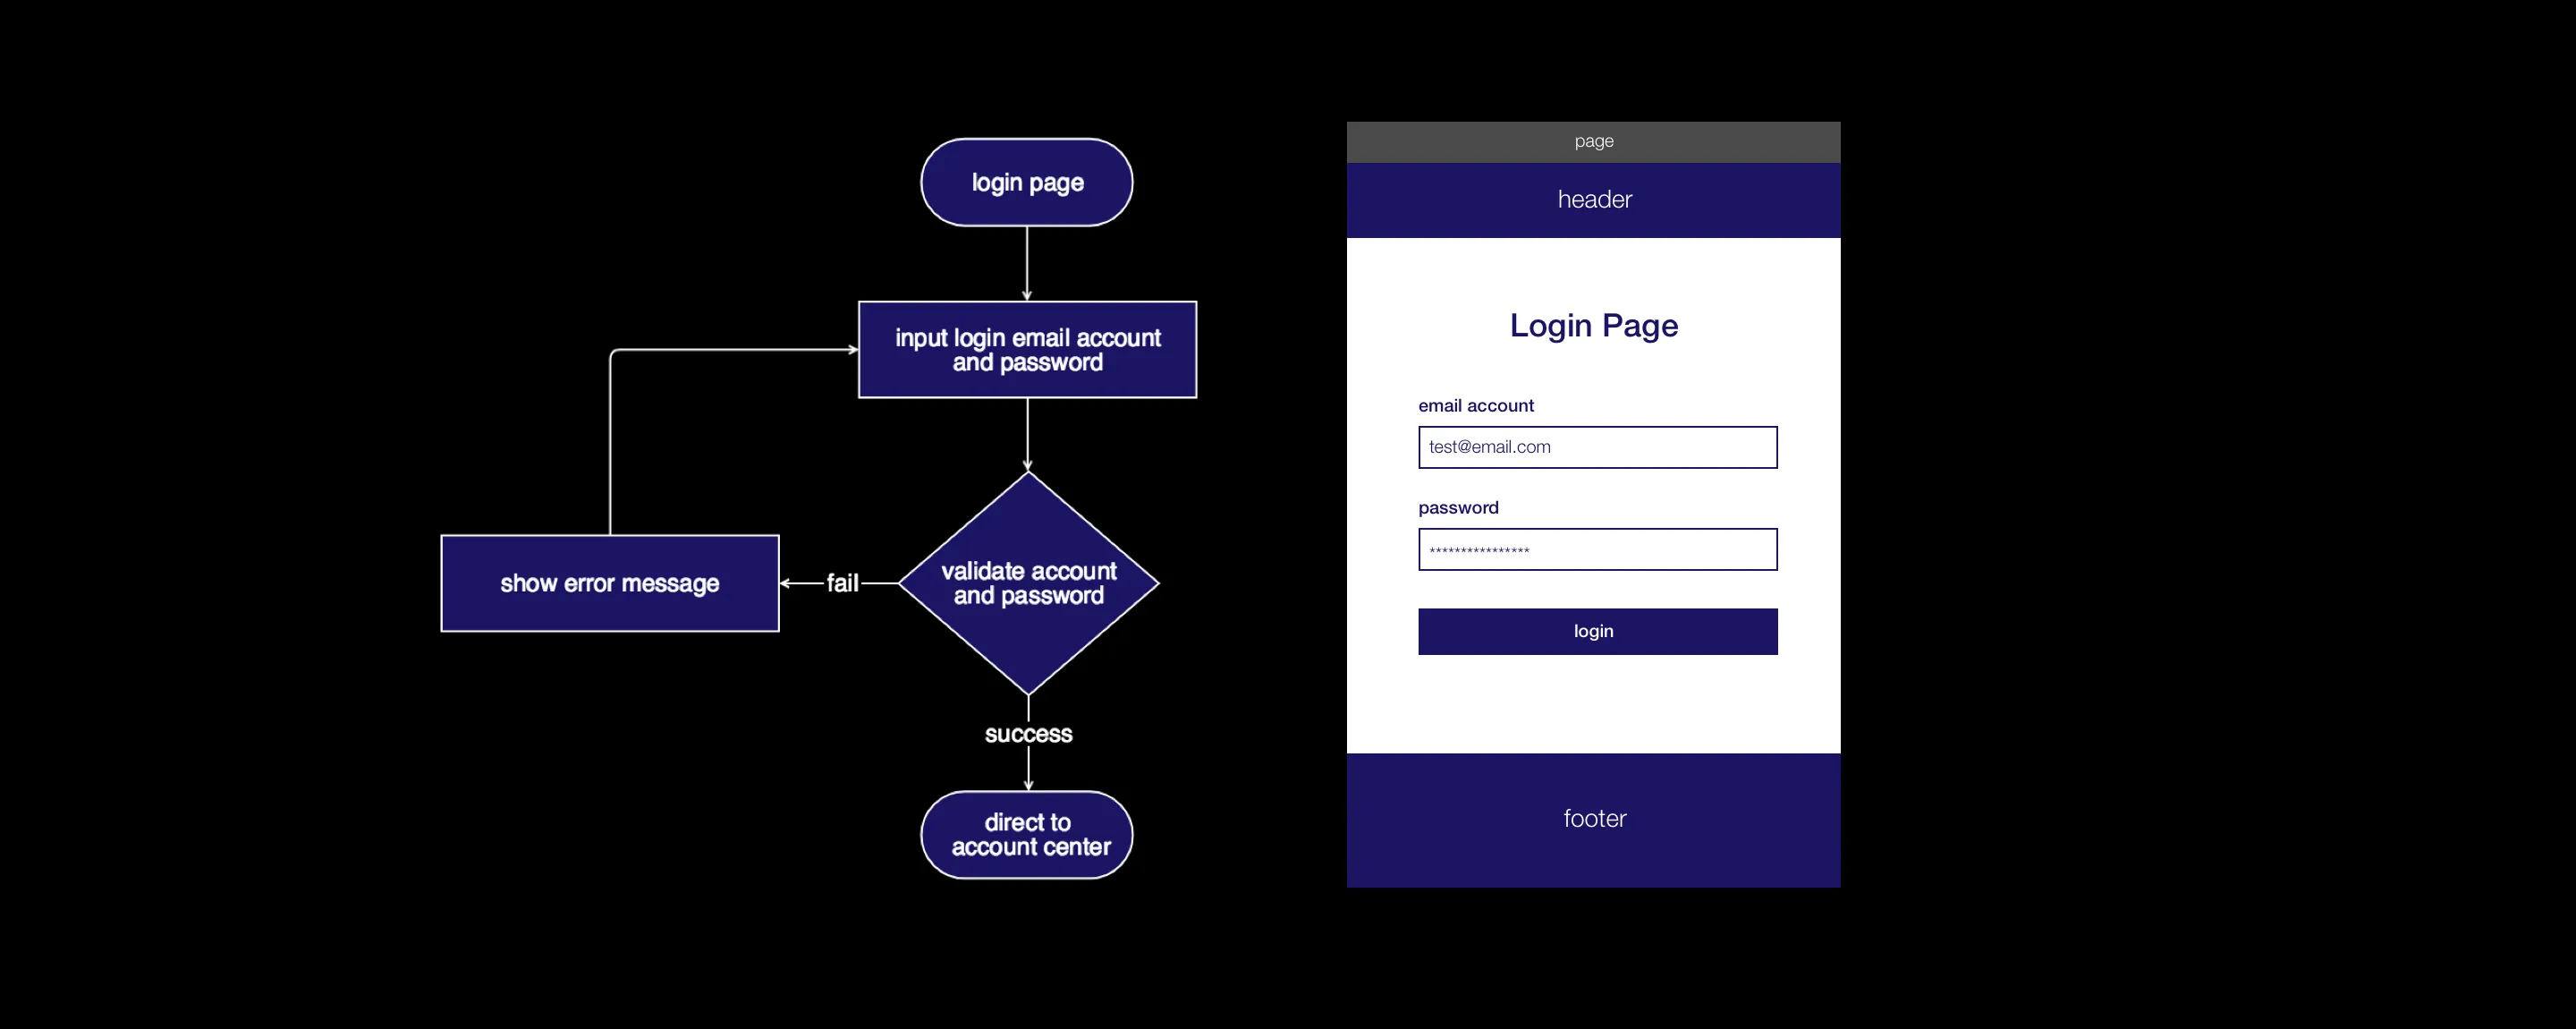 Flowchart and wireframe of authentication page